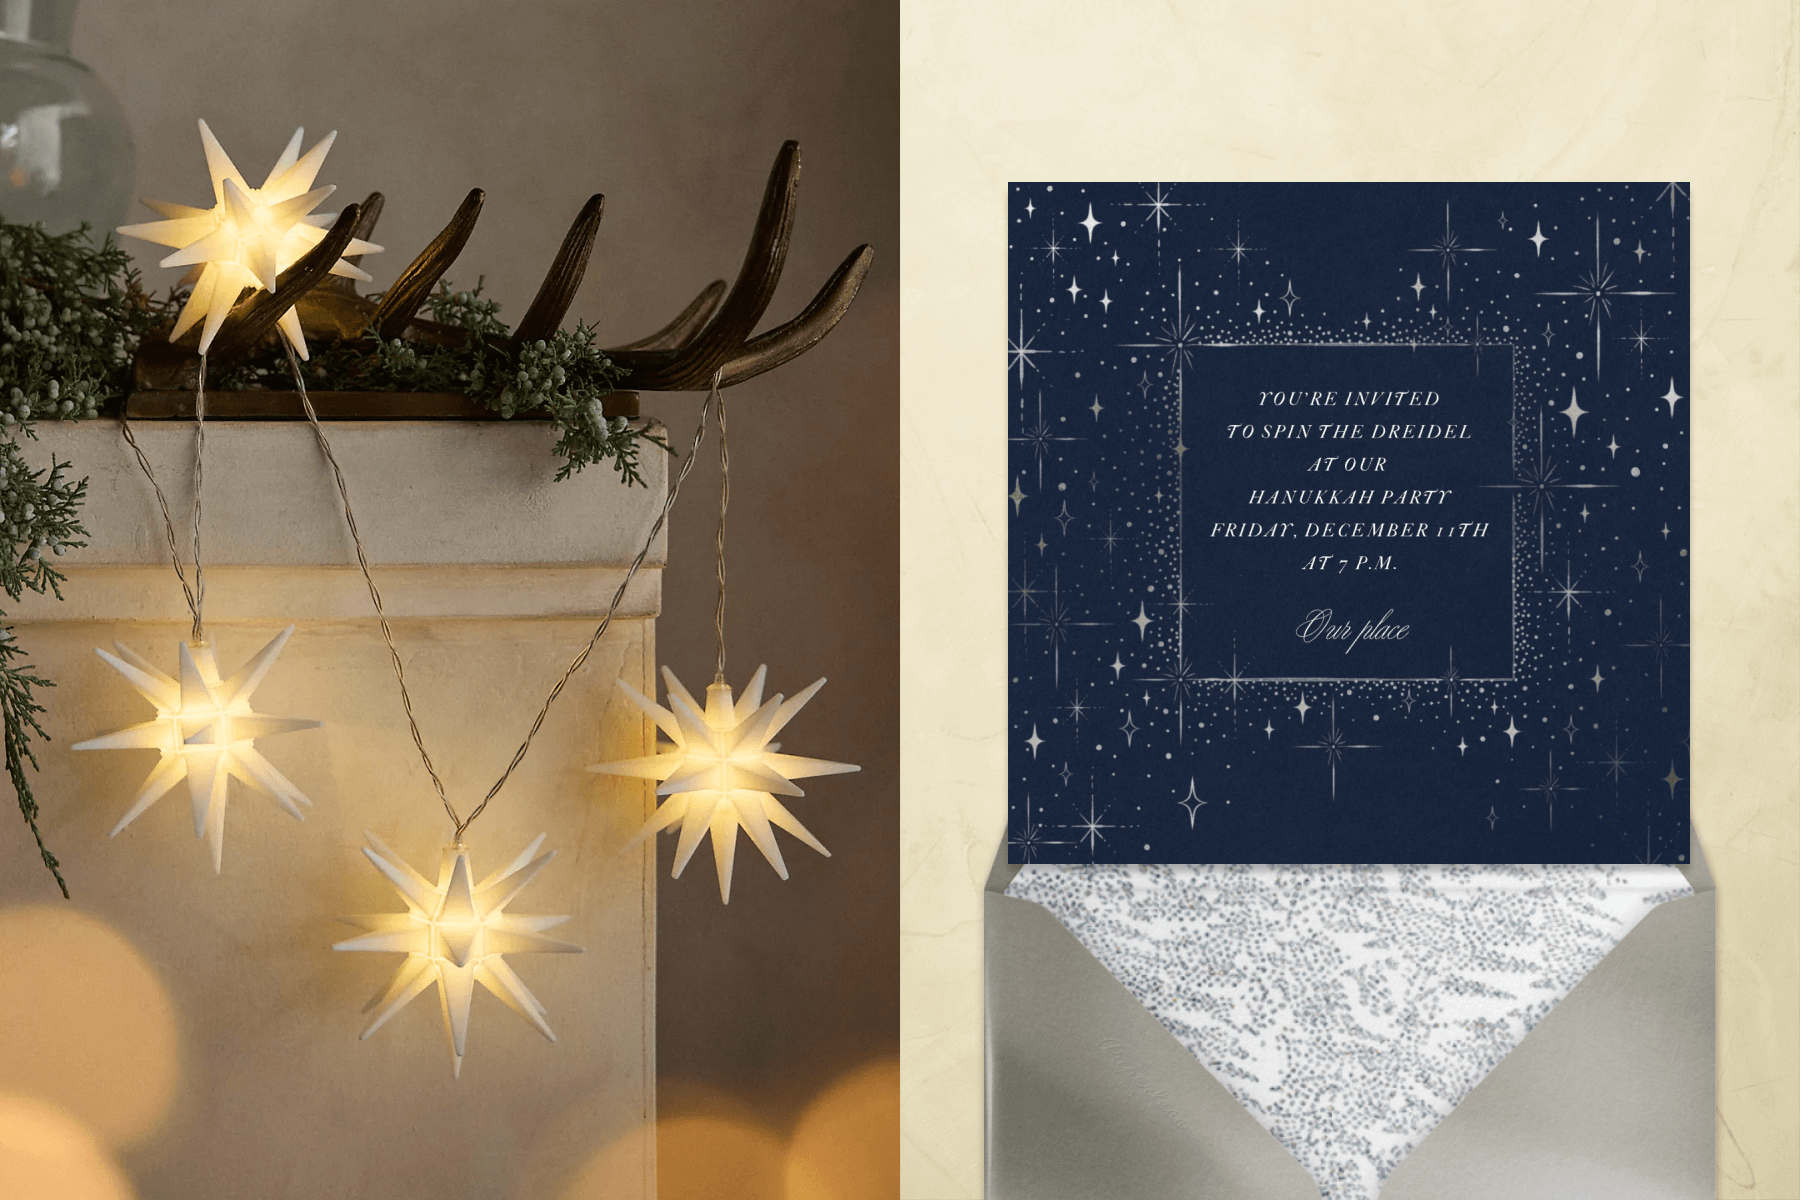 3-D star-shaped string lights hang from an antler on a shelf. Right: A navy blue invitation with twinkling white stars around the border and a silver envelope.